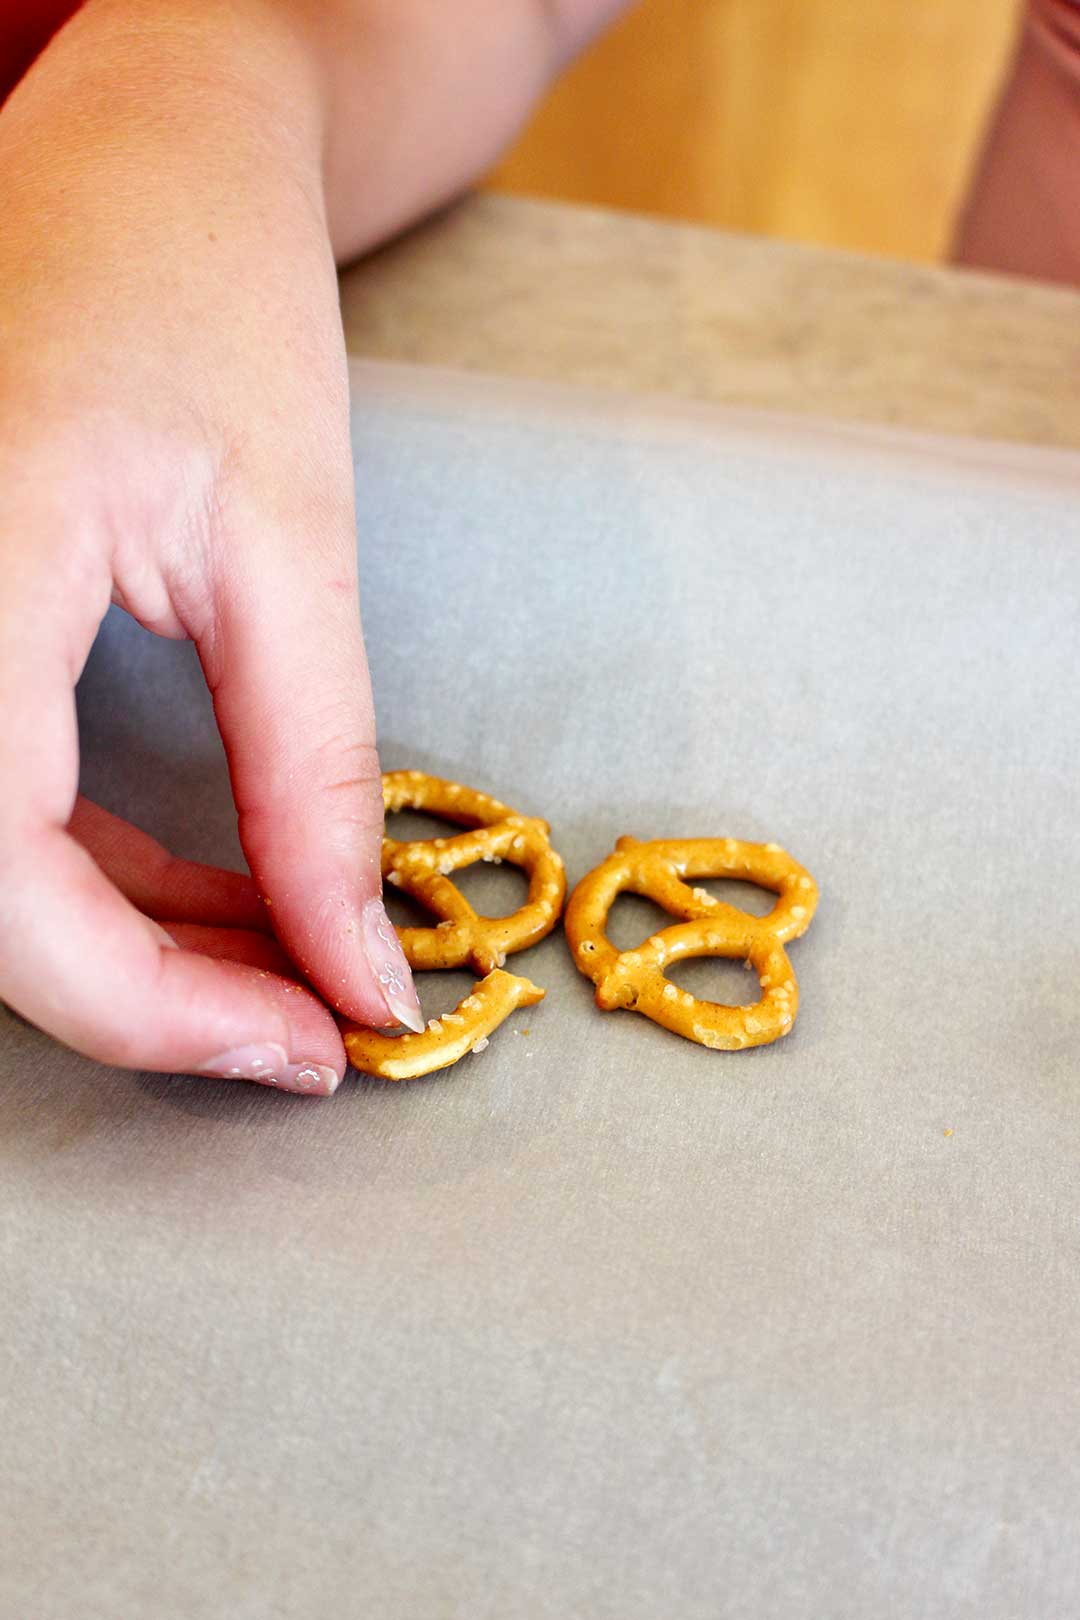 A child arranging pretzels in the shape of a butterfly.